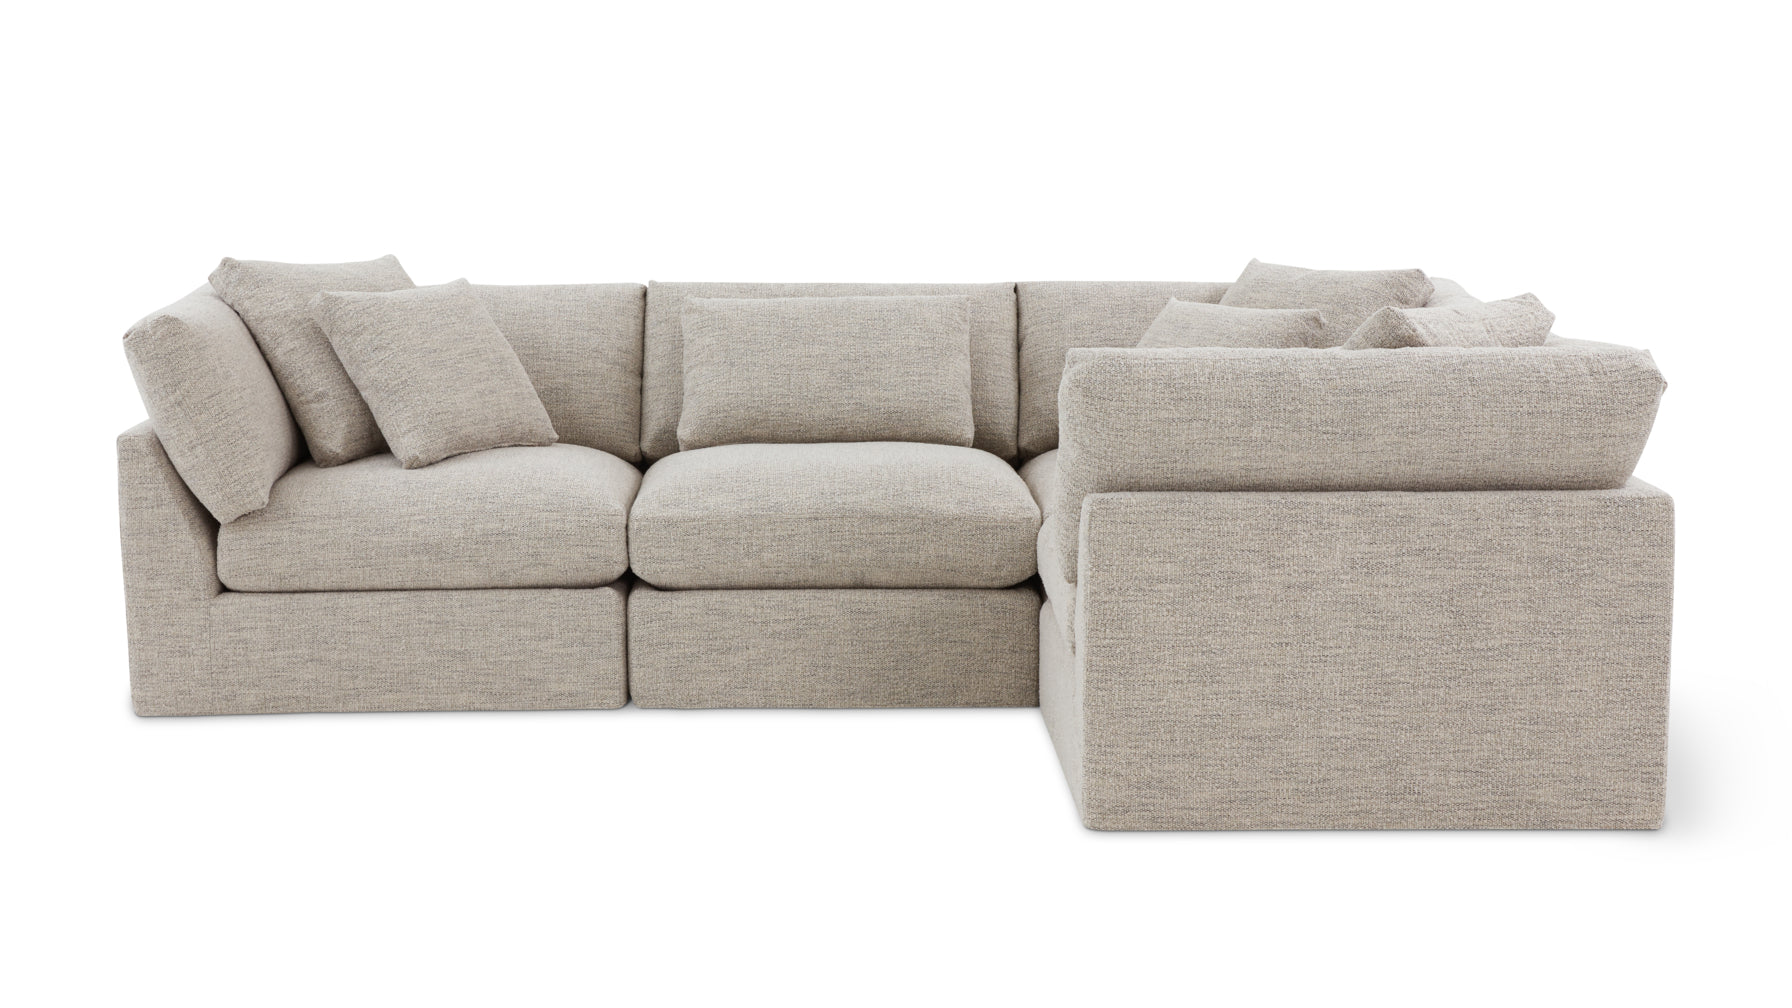 Get Together™ 4-Piece Modular Sectional Closed, Large, Oatmeal - Image 1